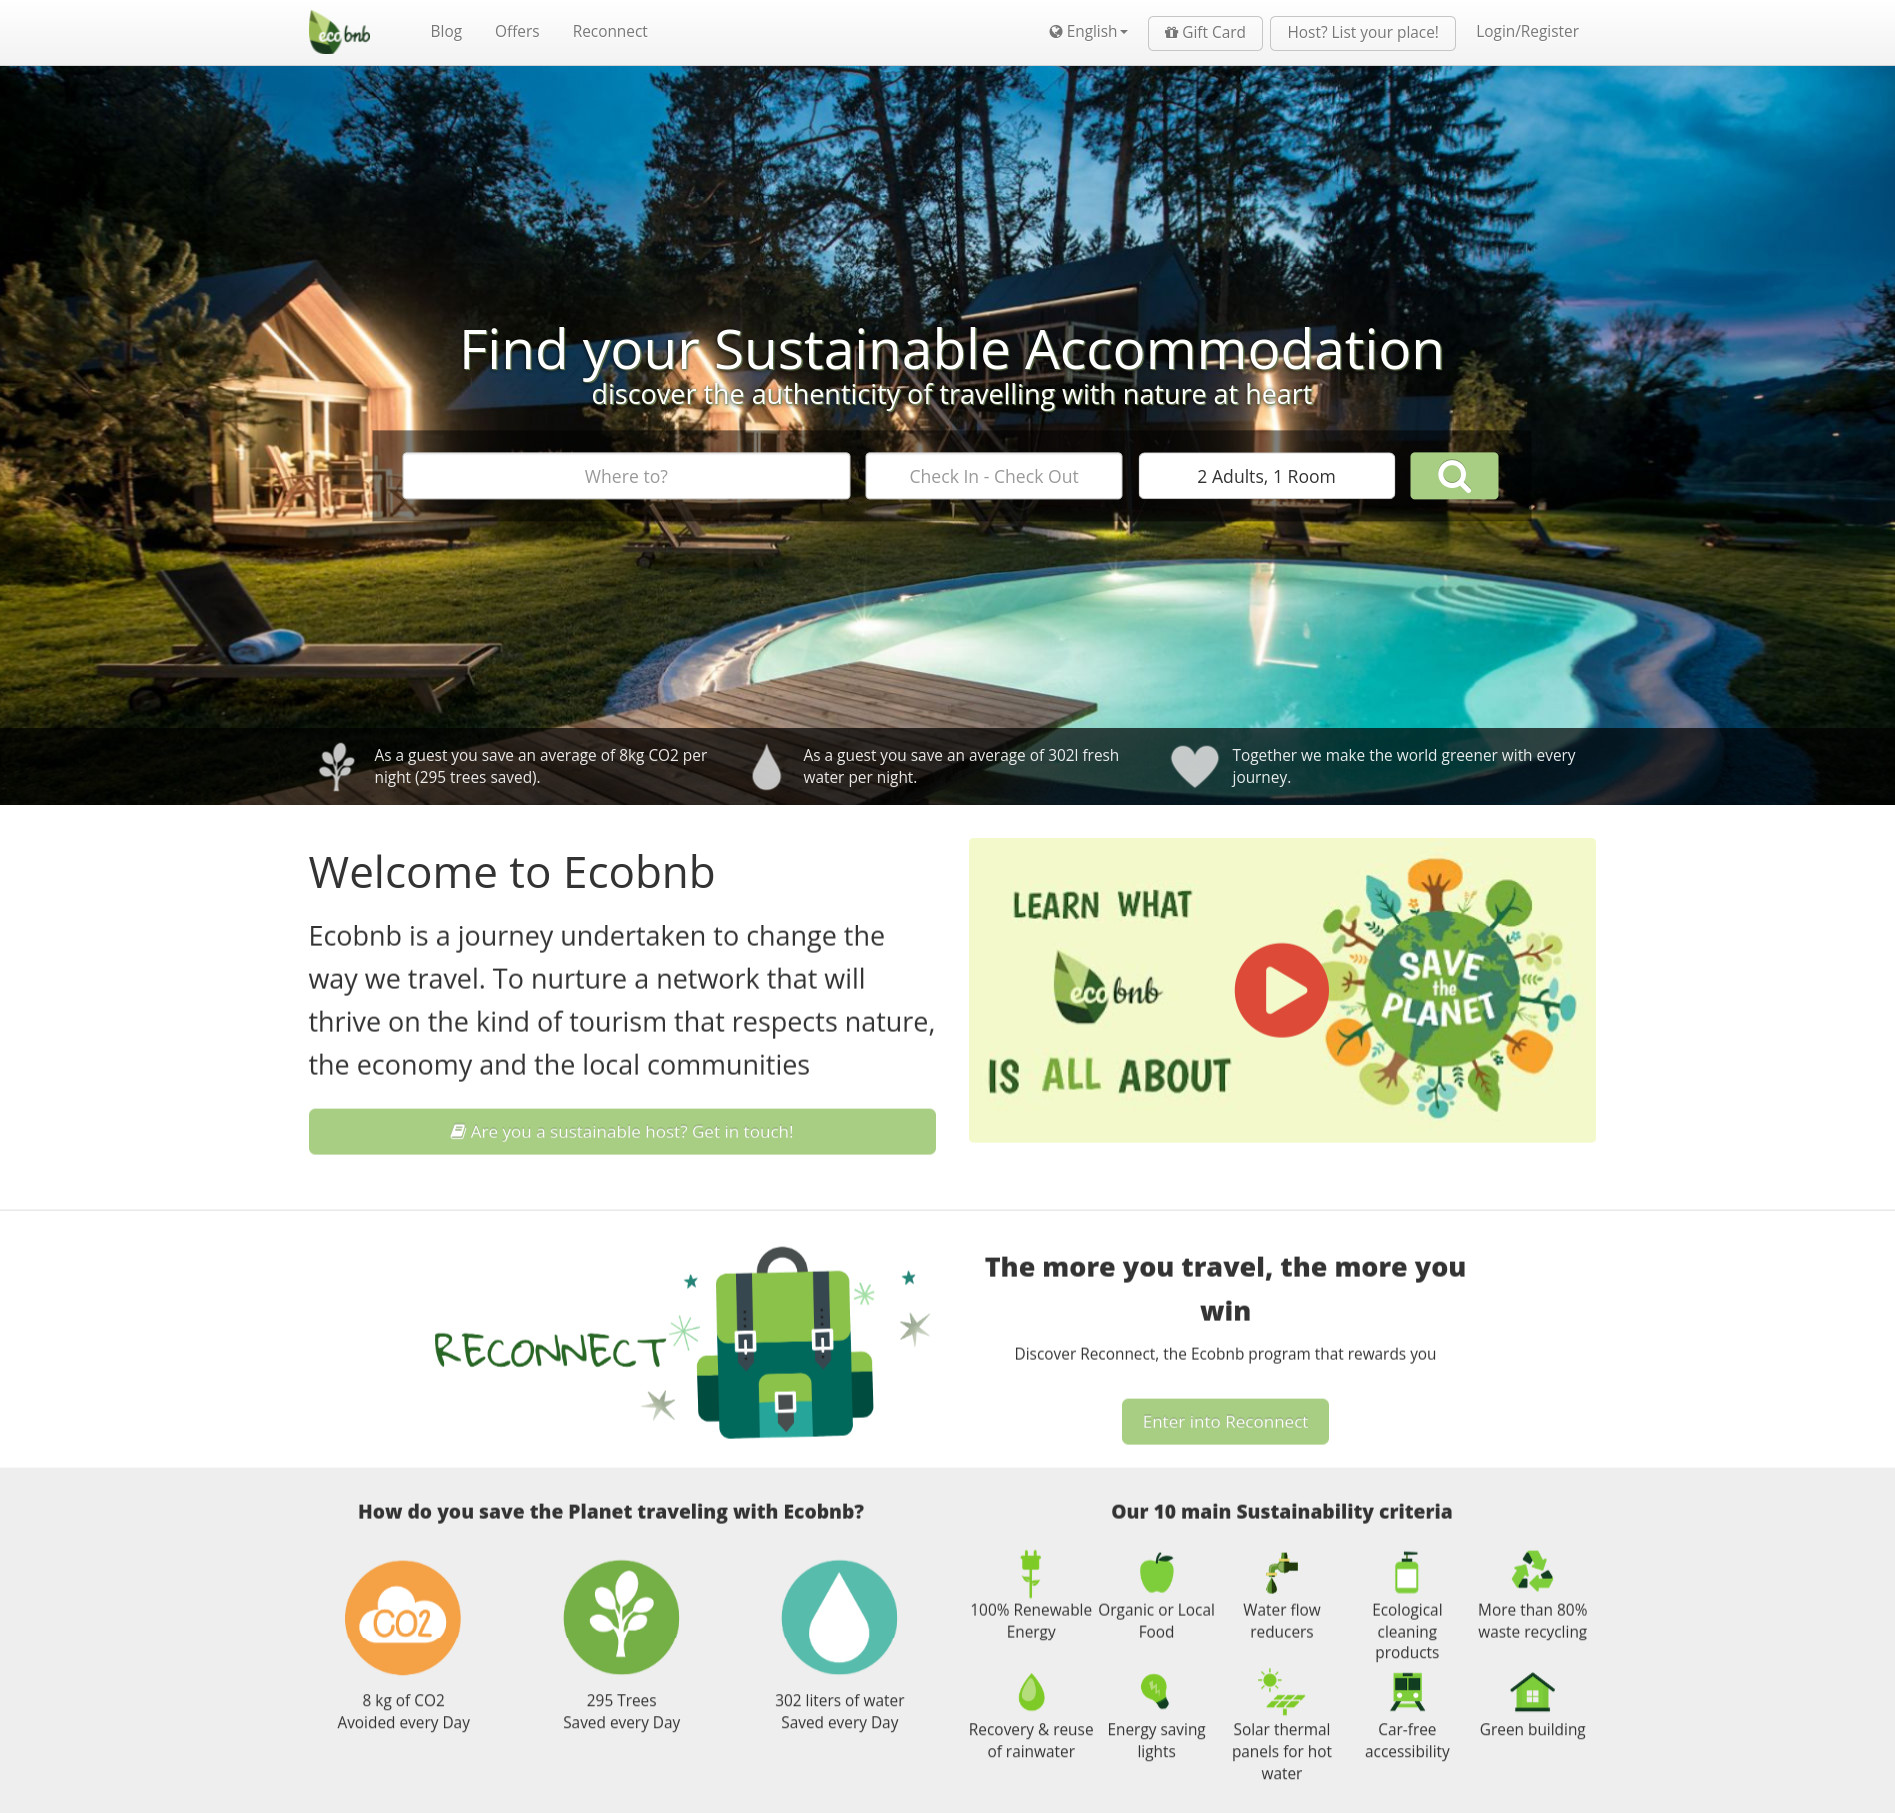 ecobnb, find your sustainable accomodation